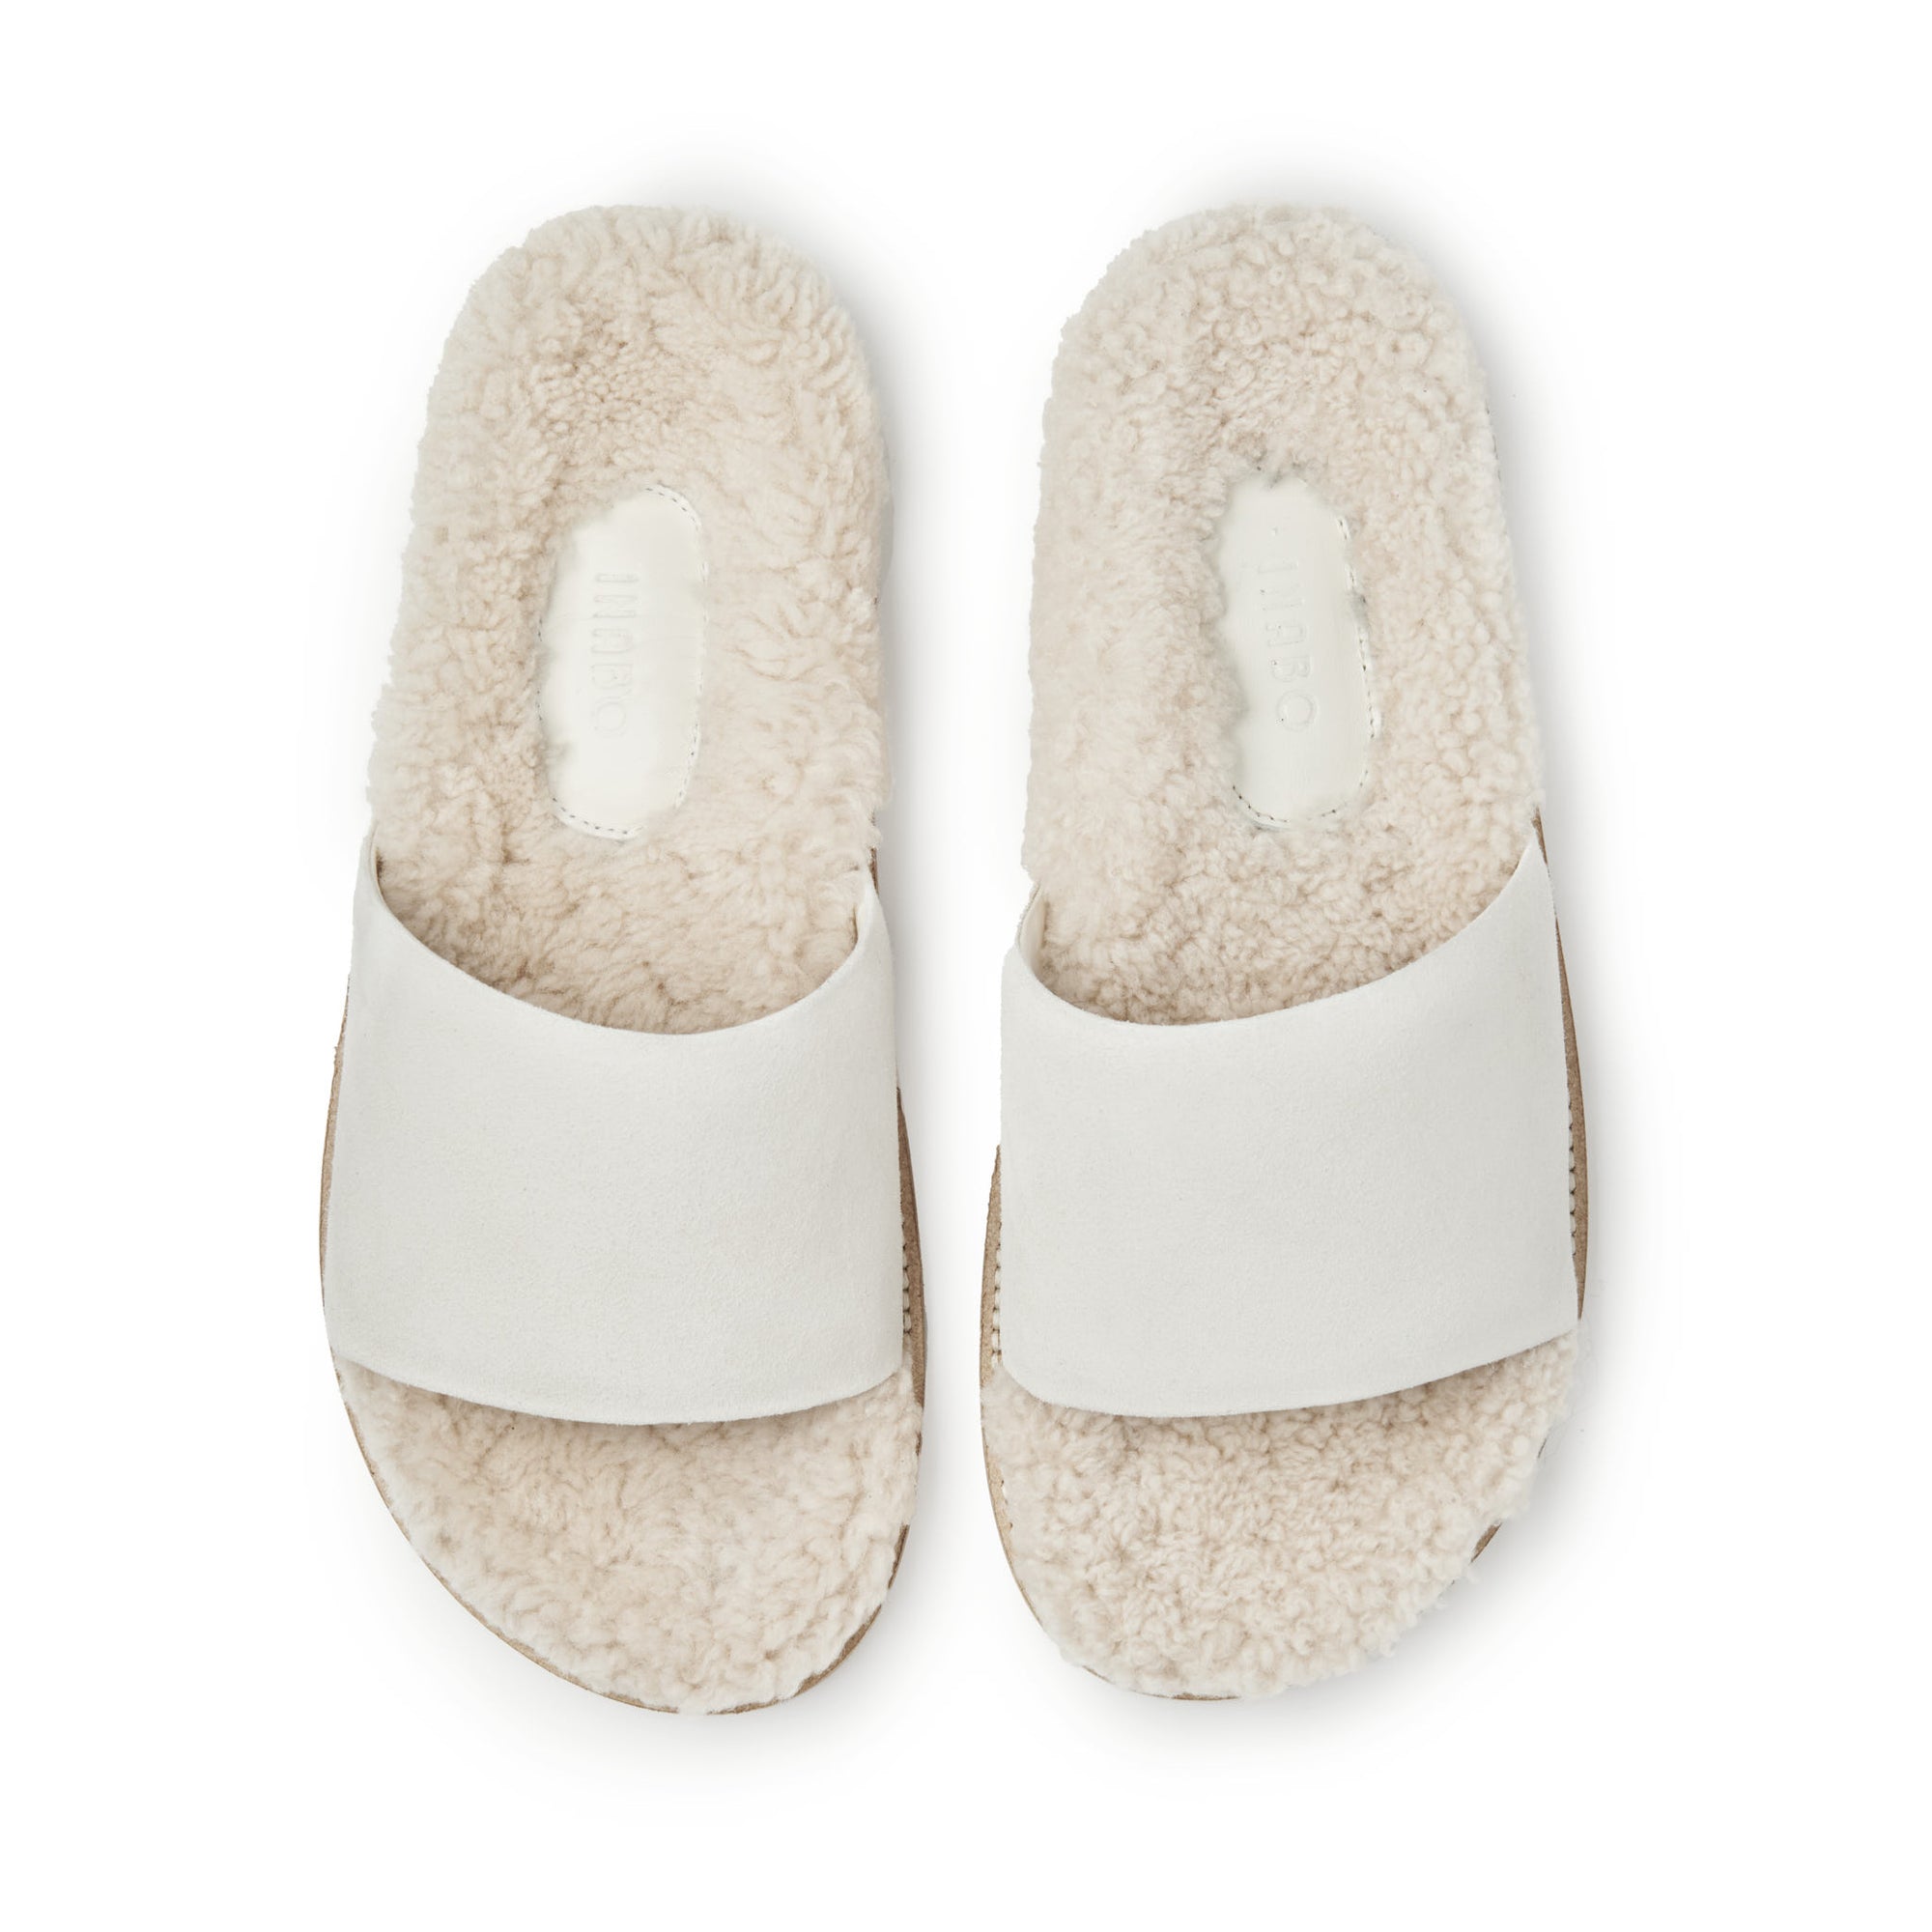 Inabo Women's Slipper in cream suede and white shearling with an open-toe shown from above